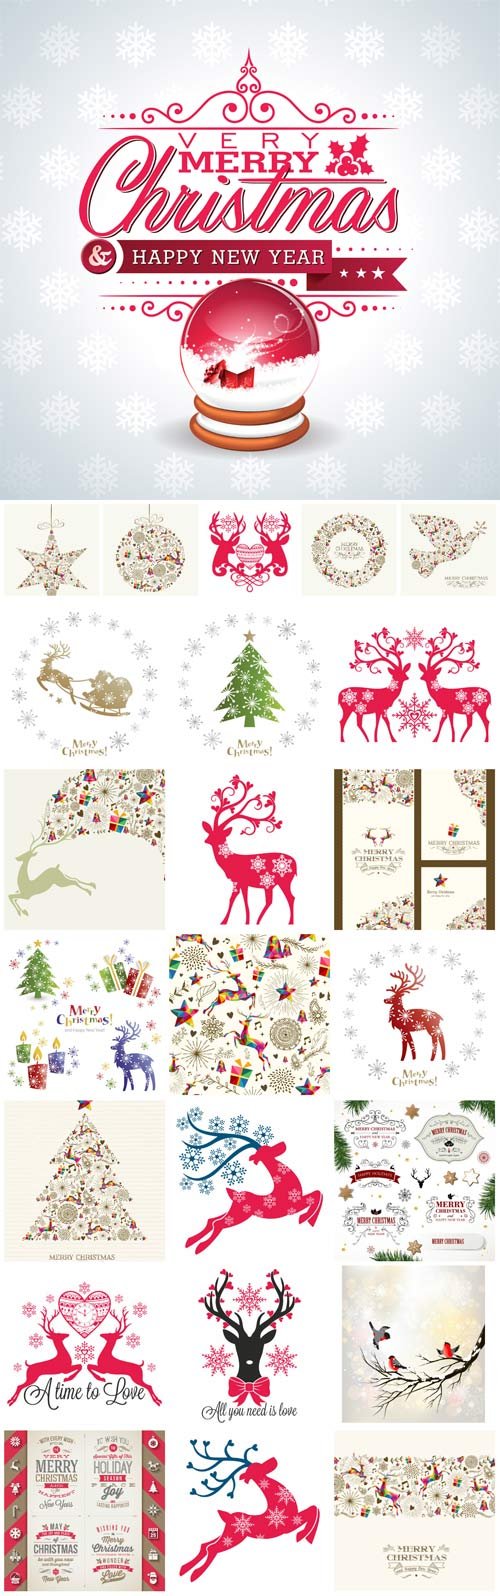 Christmas vector with reindeer and winter decor